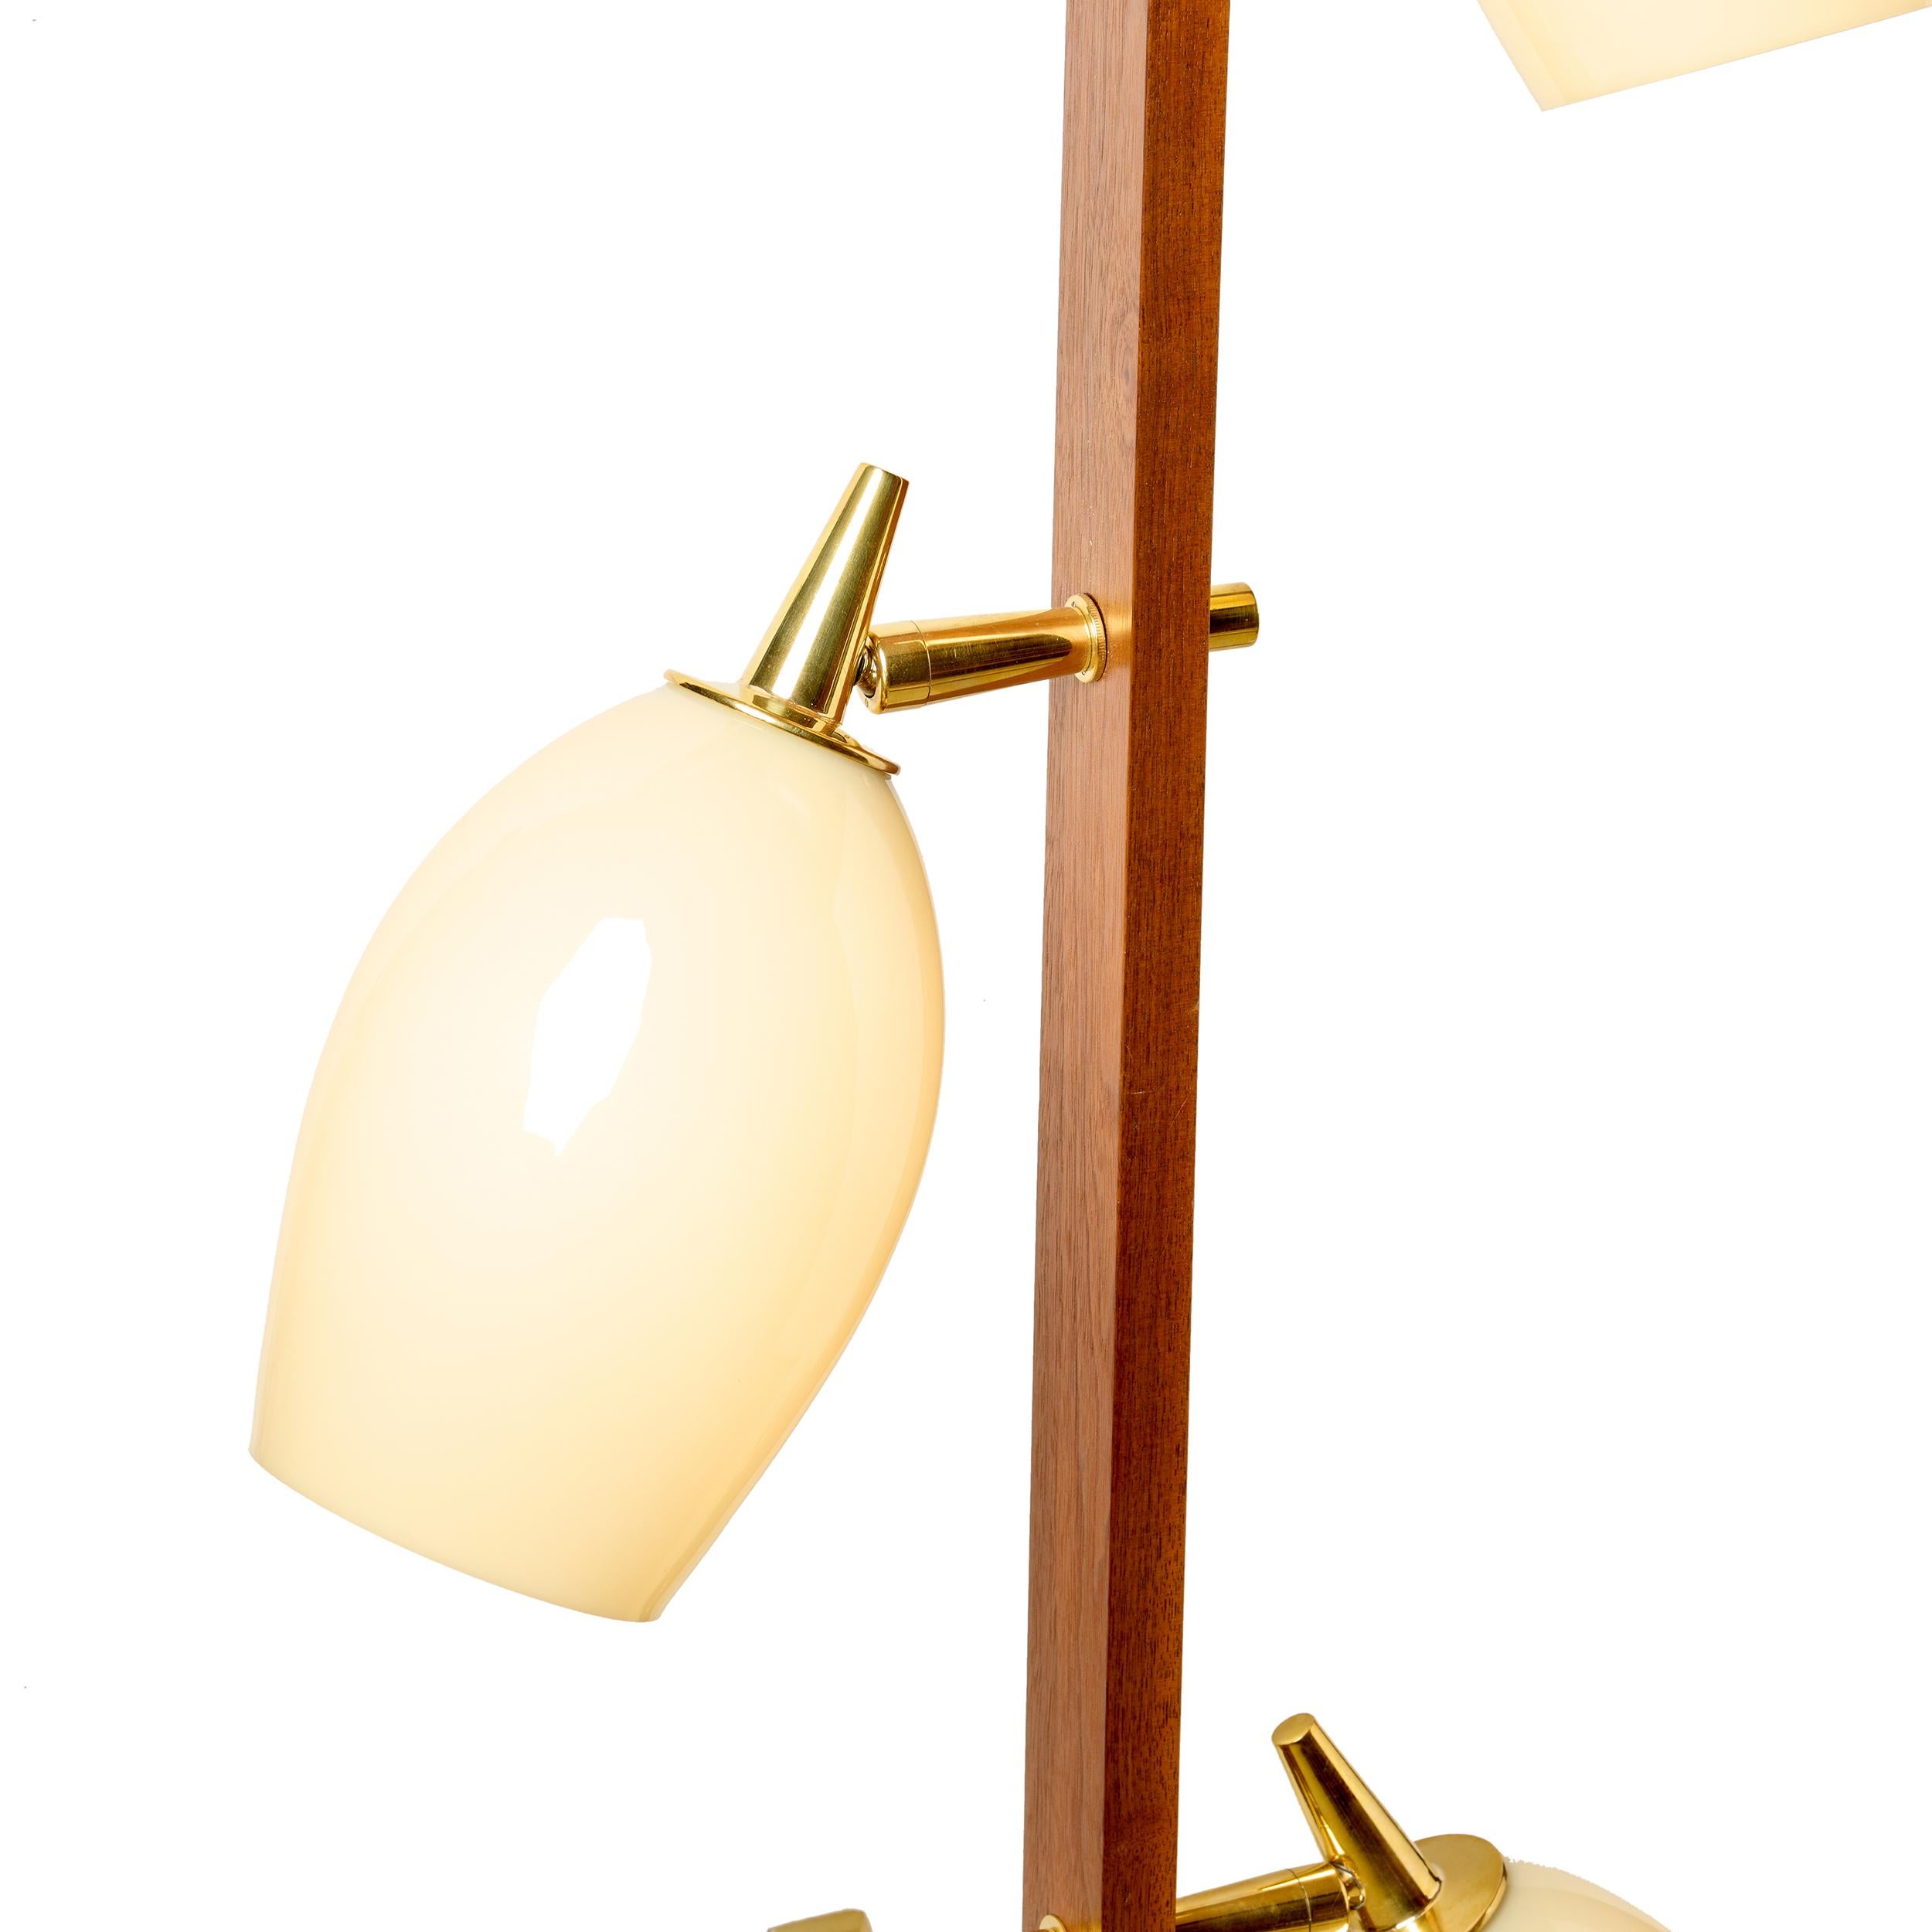 A pair of walnut and brass wall sconces, each with 3 articulating cream colored glass shades. Verticals are tapered at beth ends. Machined and polished brass wall stand-off. Electric can either be hard-wired or plugged-in.